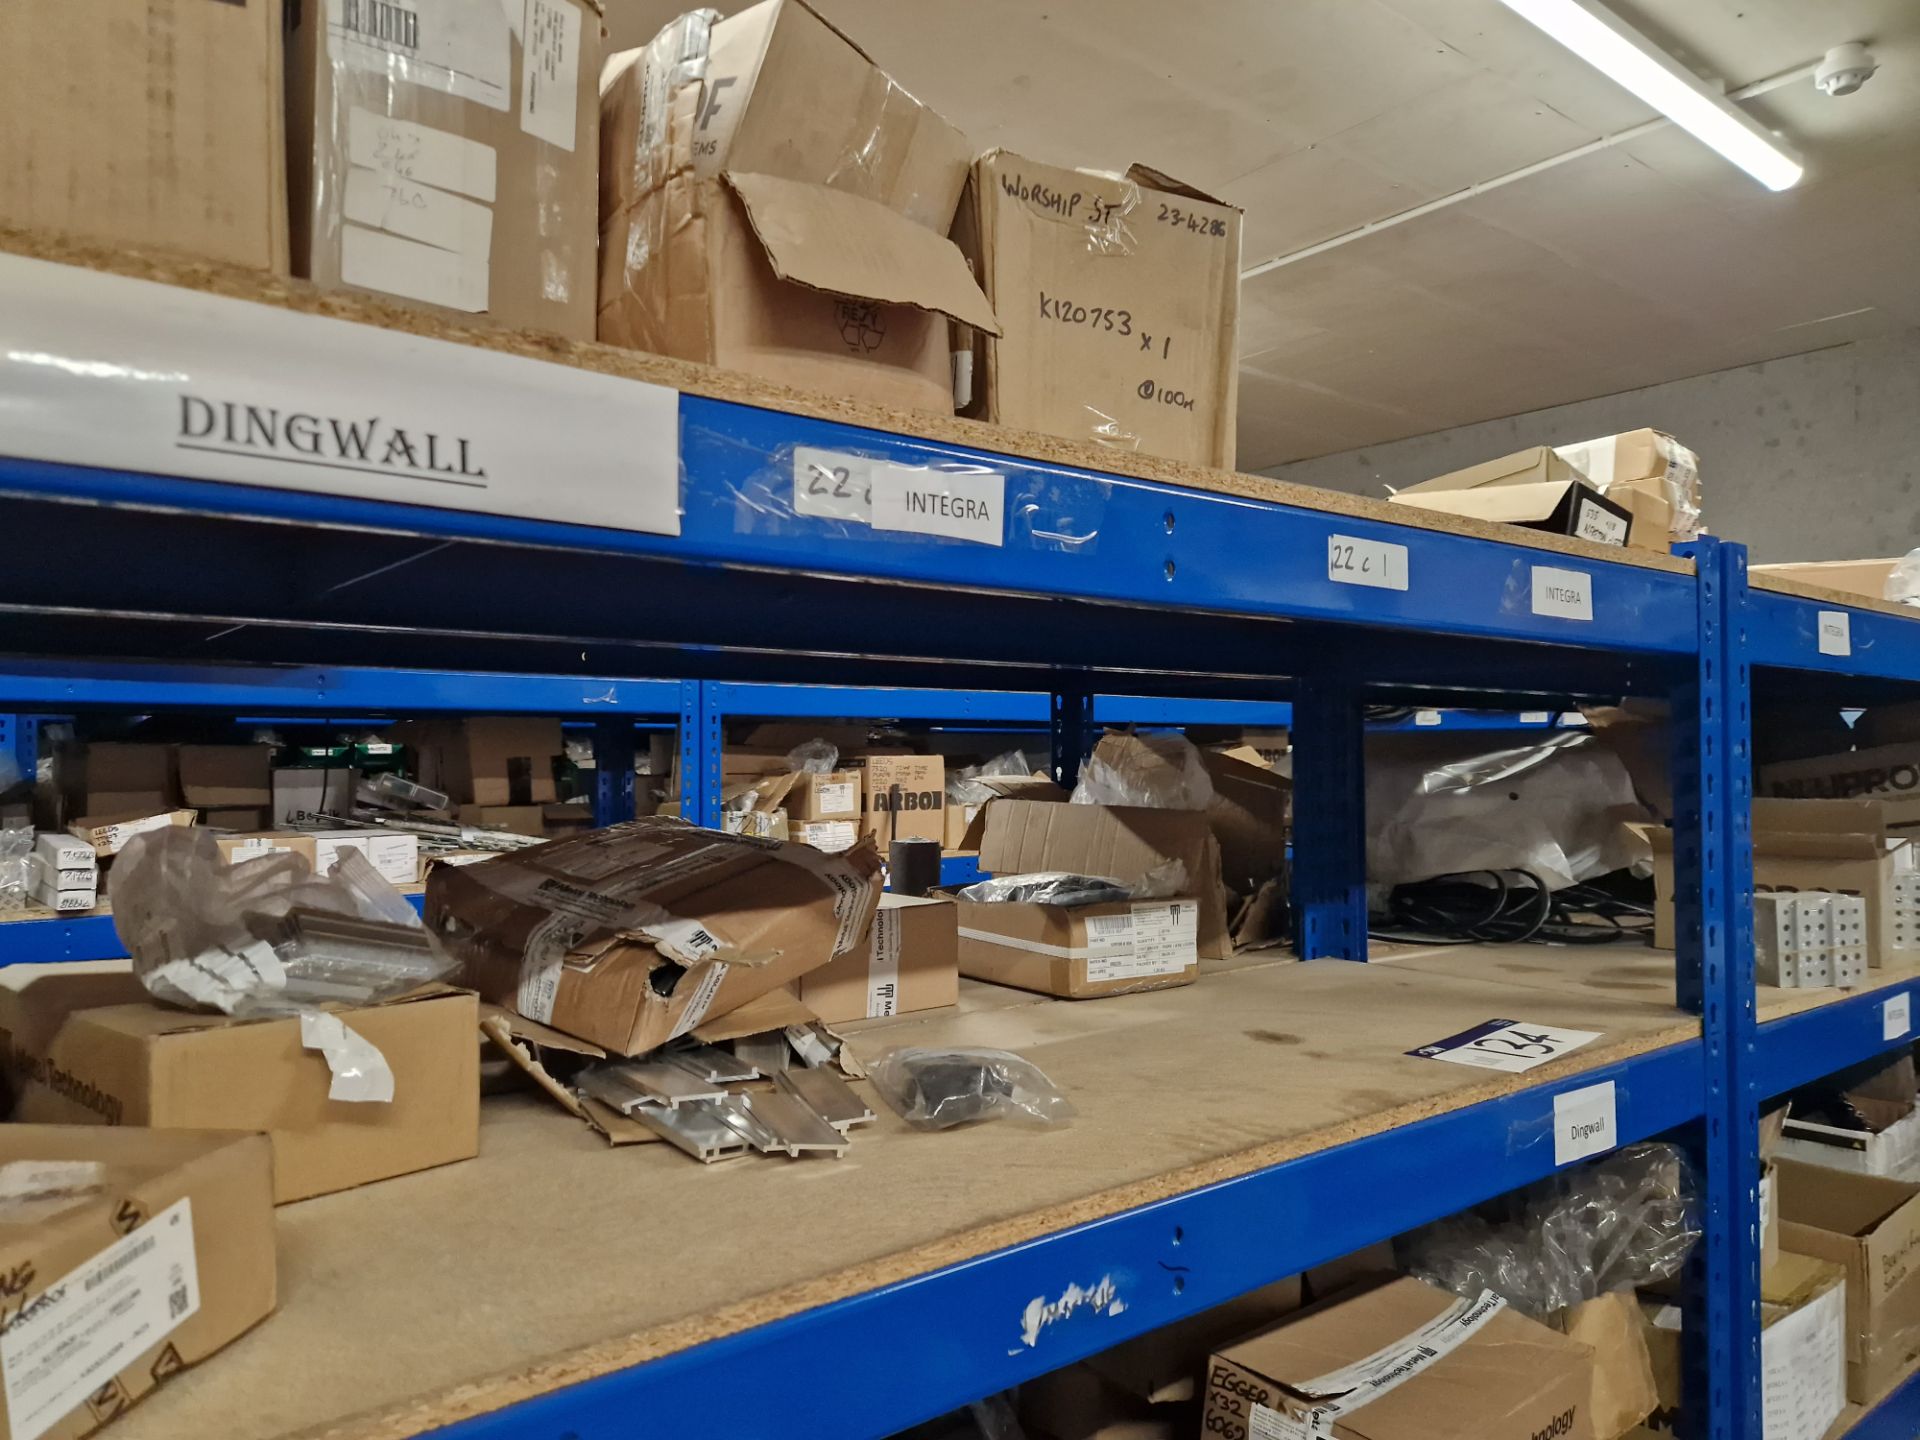 Contents to Four Bays of Shelving, including Rubber Gaskets, Aluminium Profile, End Caps, Screws, - Image 5 of 16